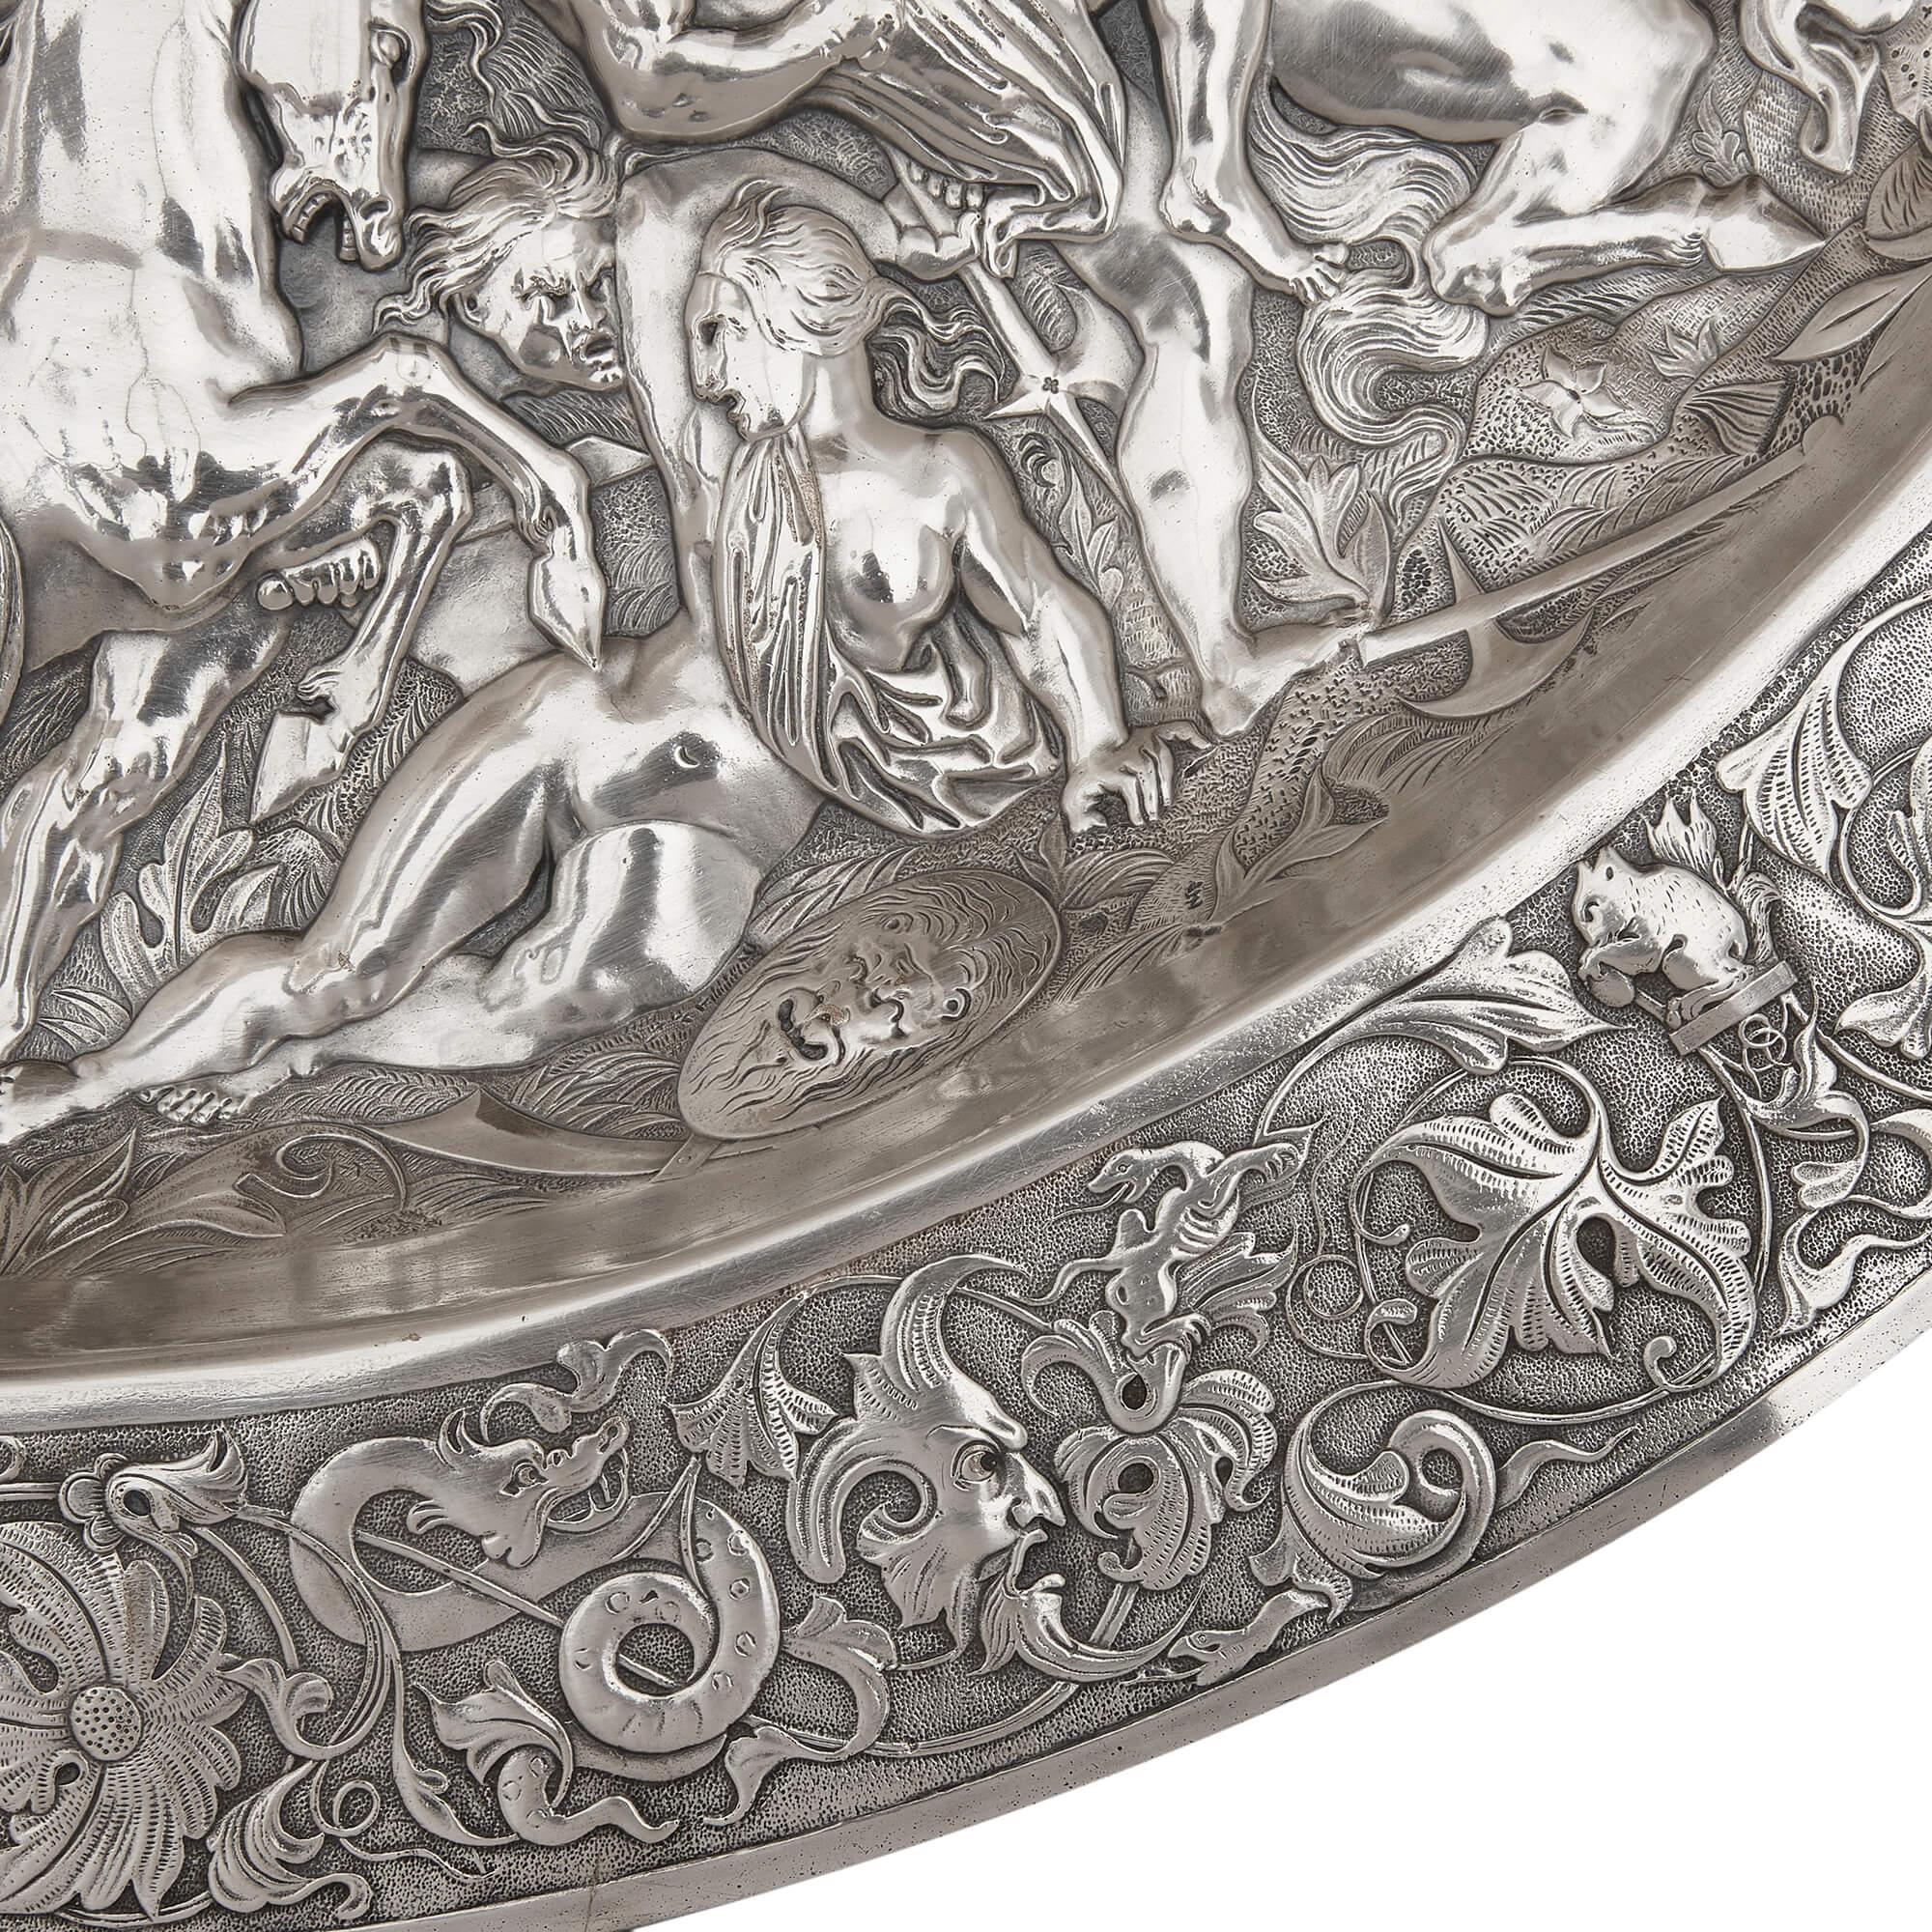 19th Century Large Silver Plate Charger of the 'Battle of the Amazons' by Elkington & Co